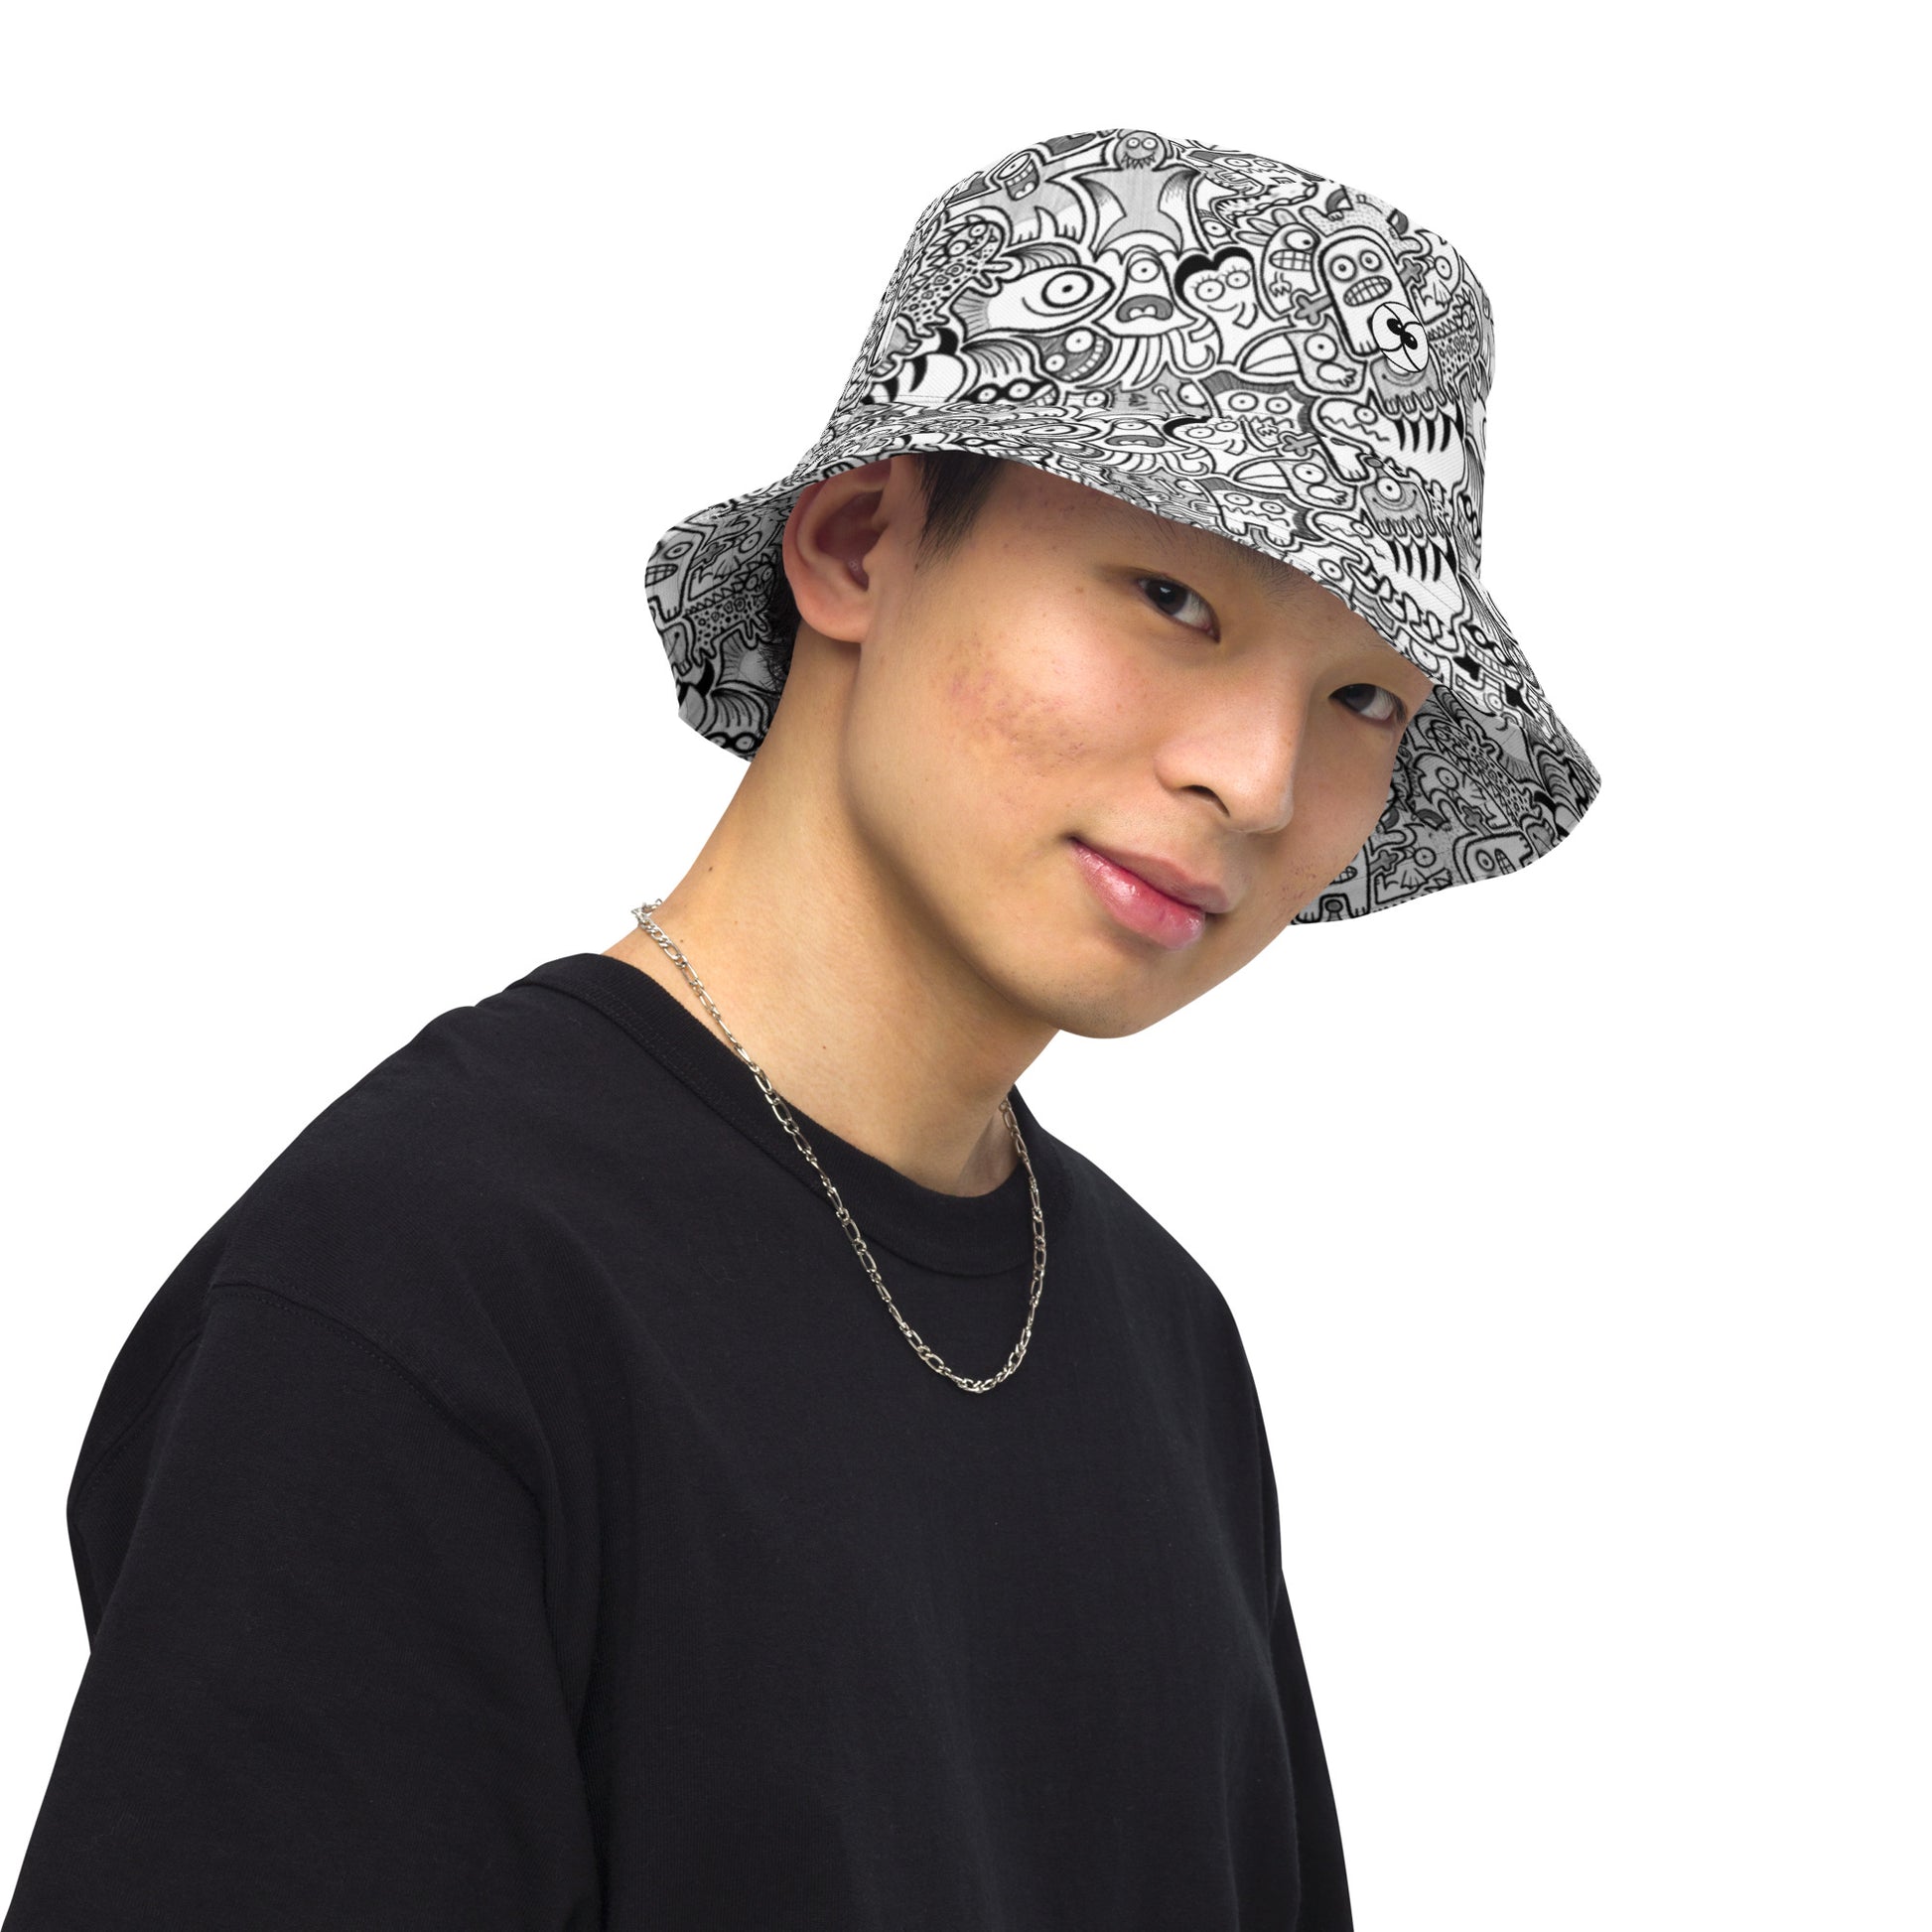 Fill your world with cool doodles Reversible bucket hat. Lifestyle